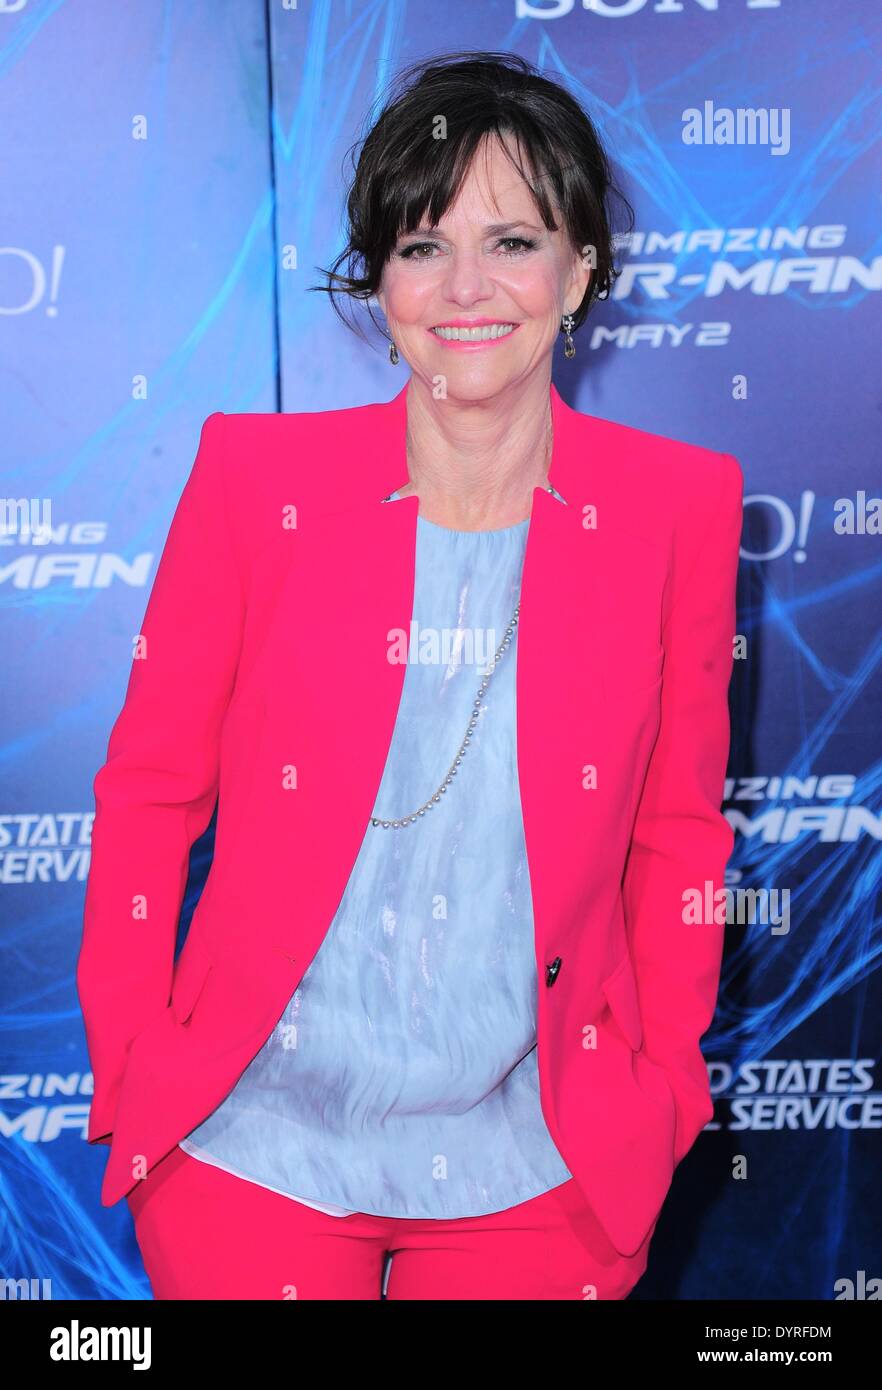 New York, NY, USA. 24th Apr, 2014. Sally Field at arrivals for THE AMAZING SPIDER-MAN 2, Ziegfeld Theatre, New York, NY April 24, 2014. Credit:  Gregorio T. Binuya/Everett Collection/Alamy Live News Stock Photo